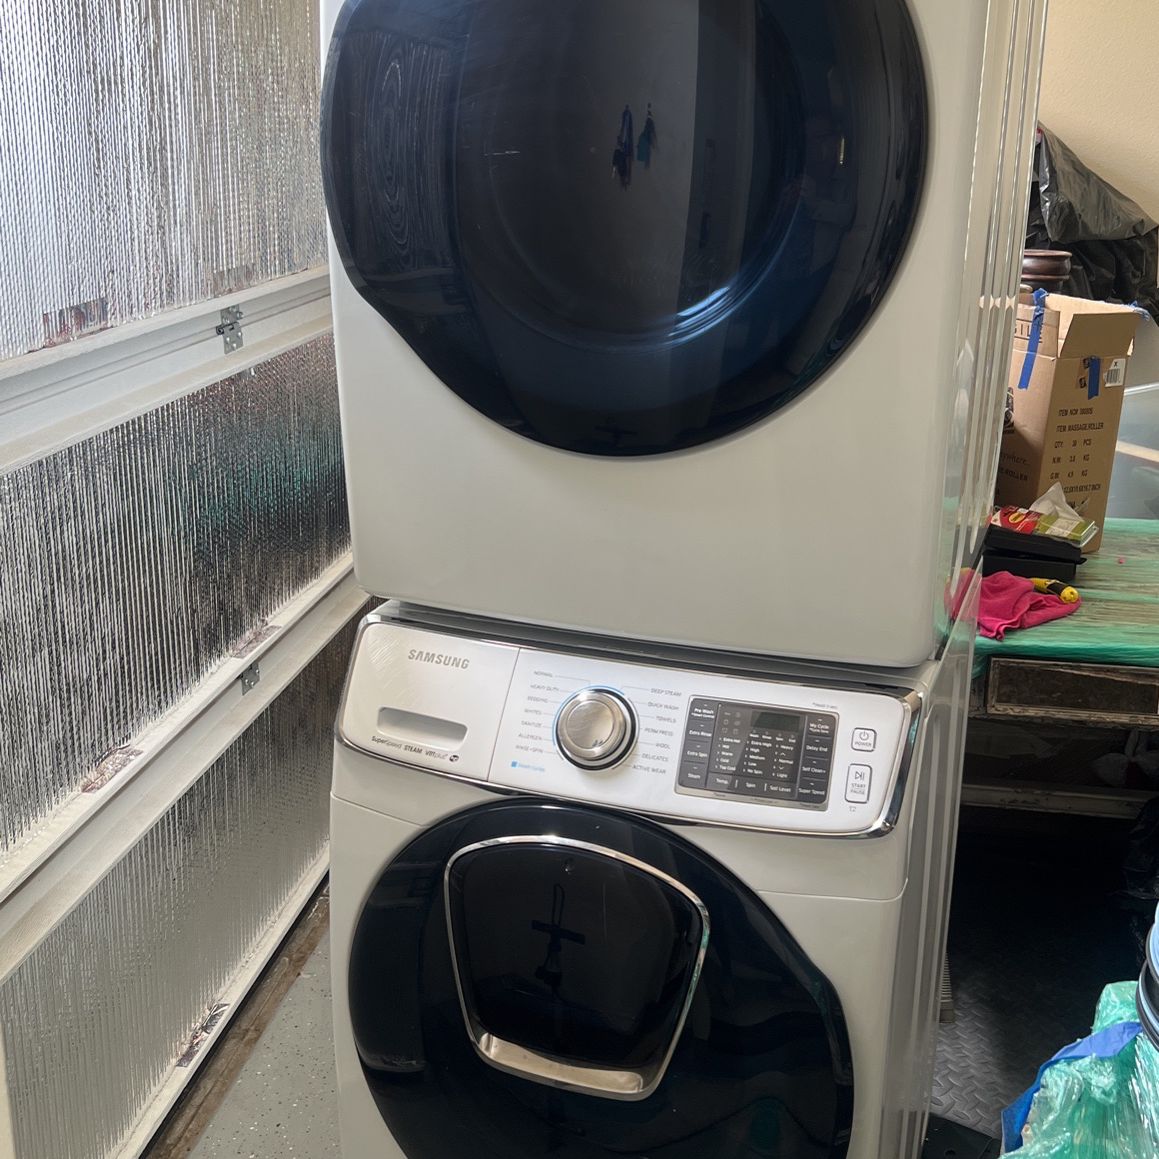 Samsung Stackable Washer And Electric Dryer.